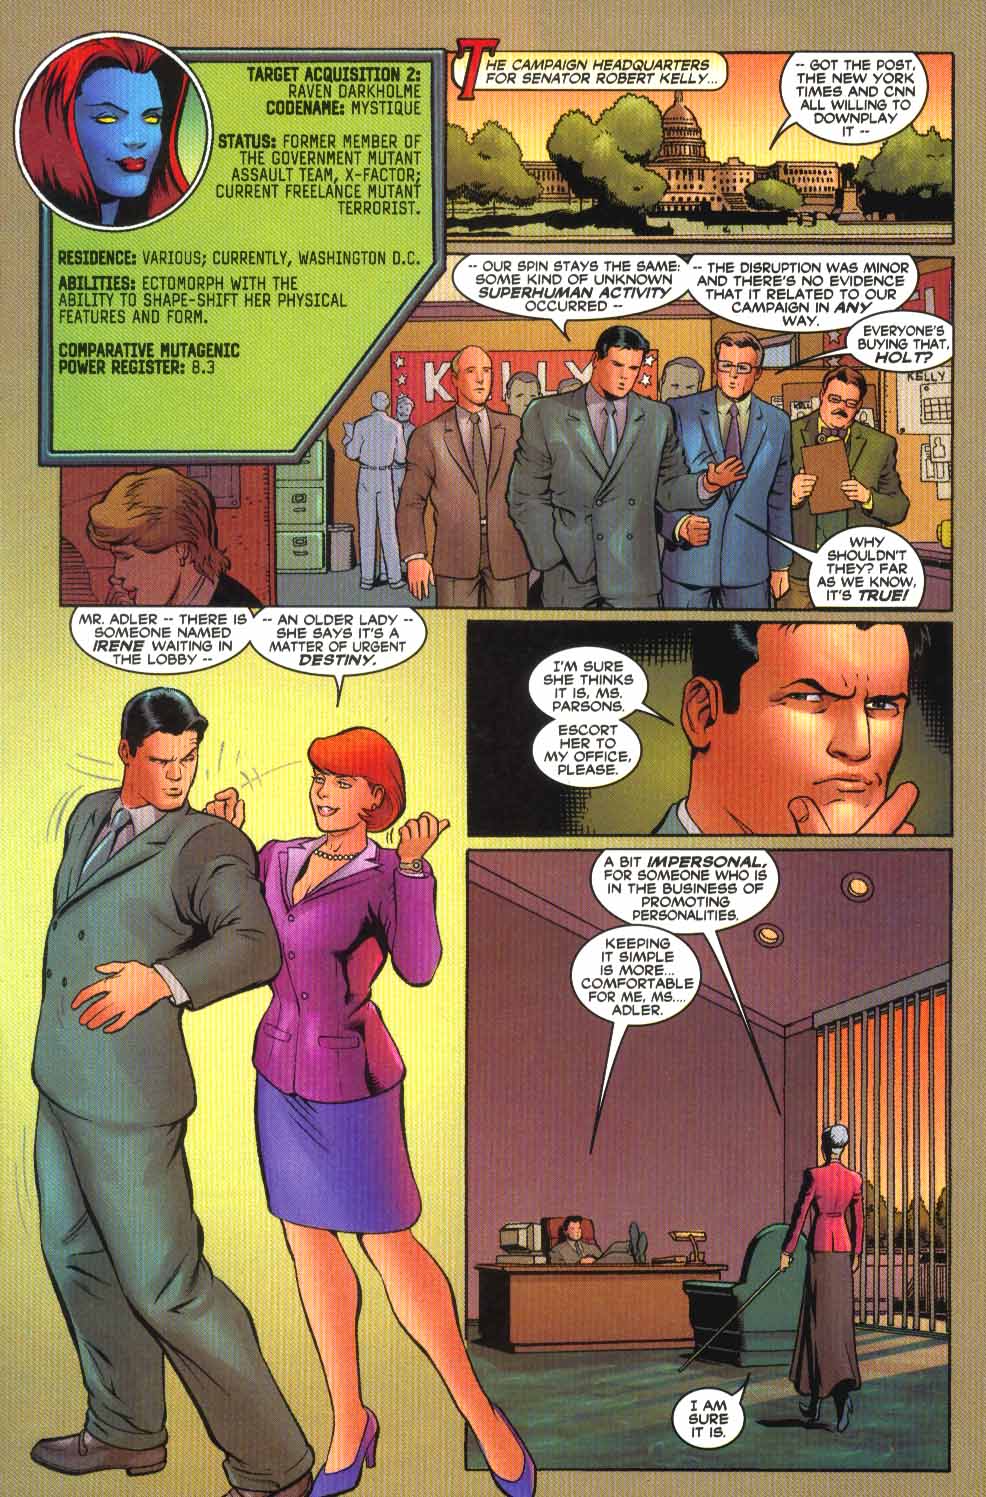 X-Men Forever (2001) 1 Page 13